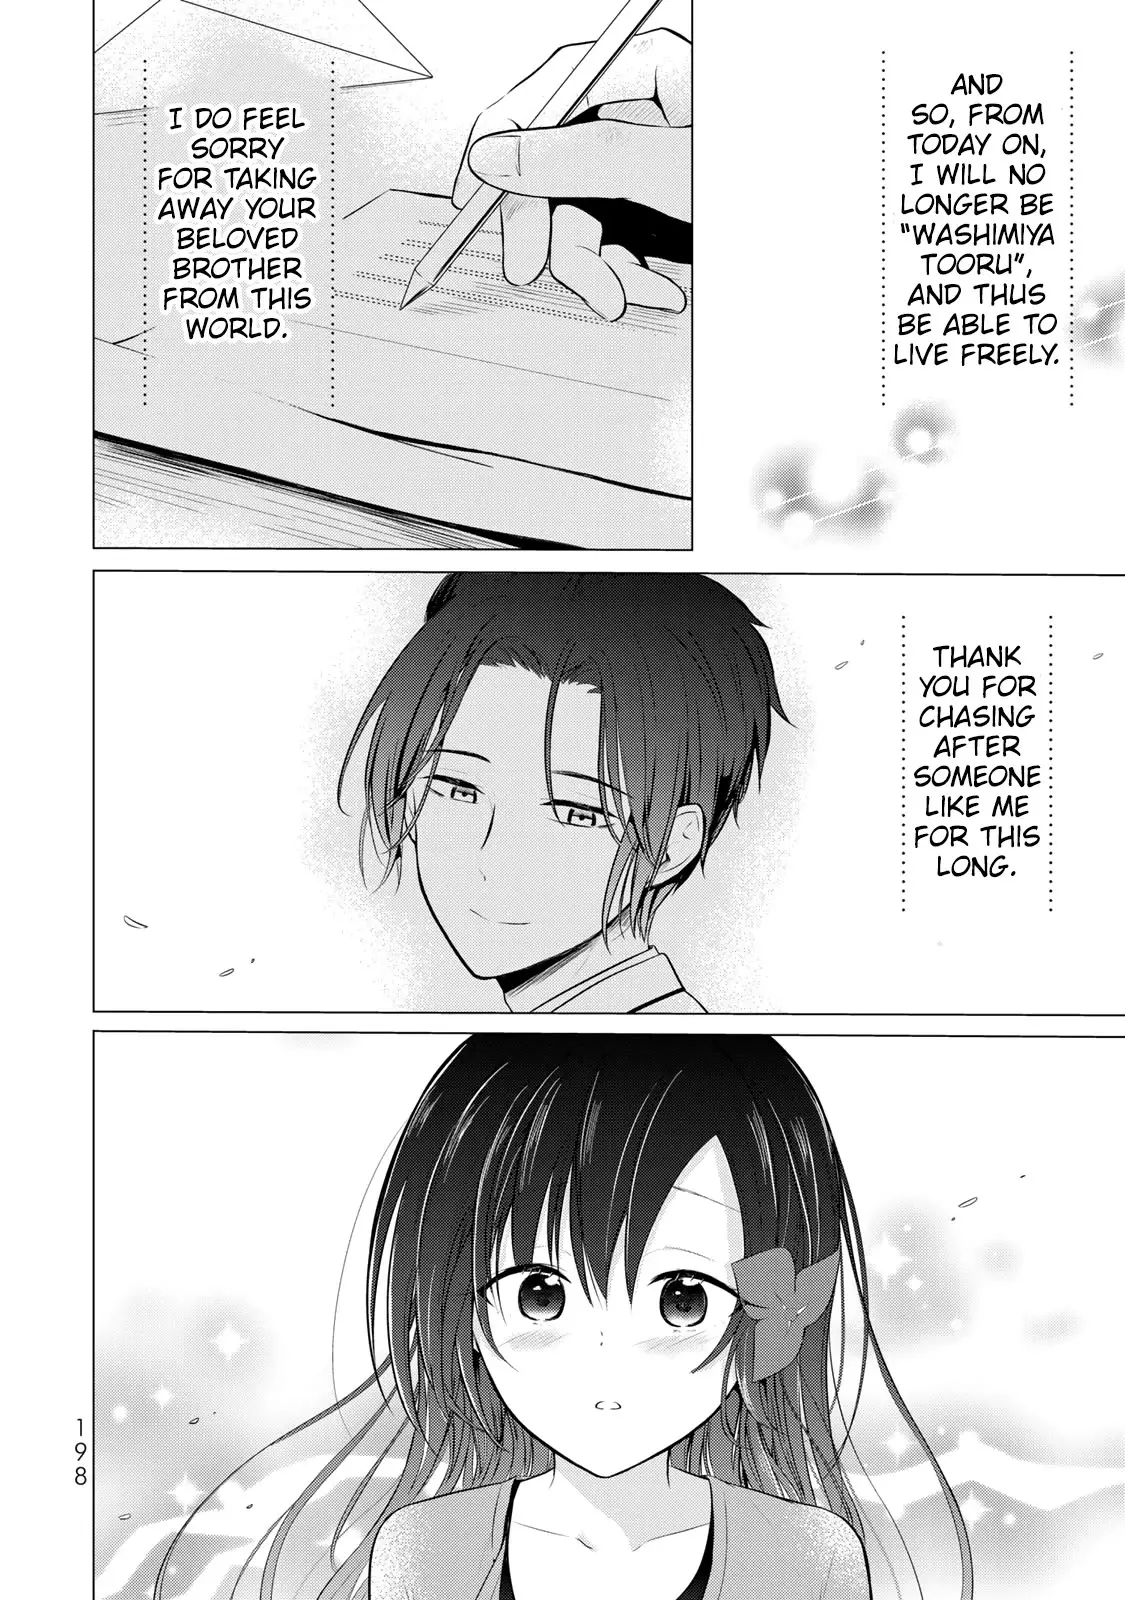 The Student Council President Solves Everything On The Bed - 13 page 29-533a91b0